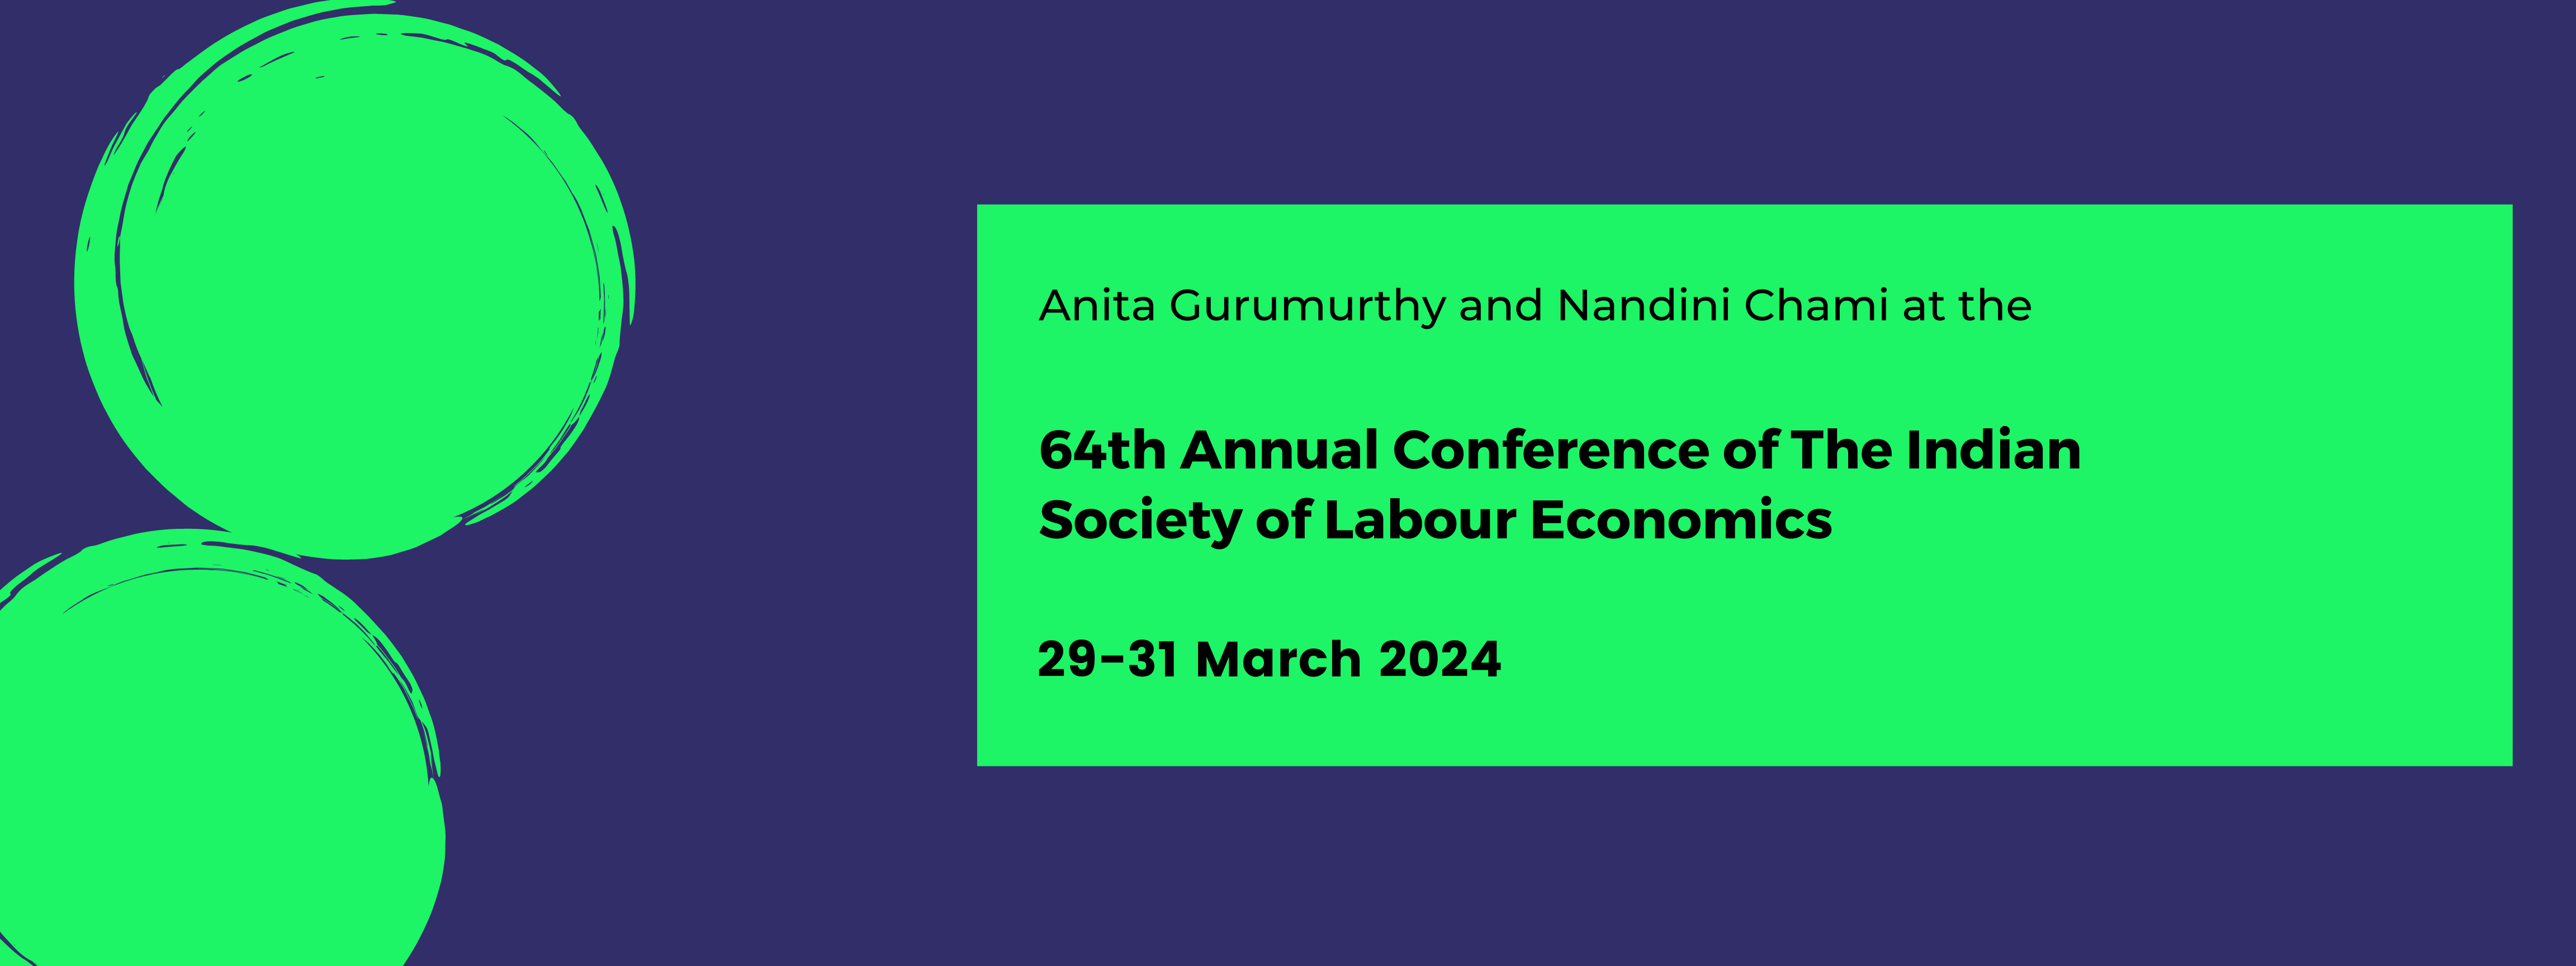 64th Annual Conference of The Indian Society of Labour Economics